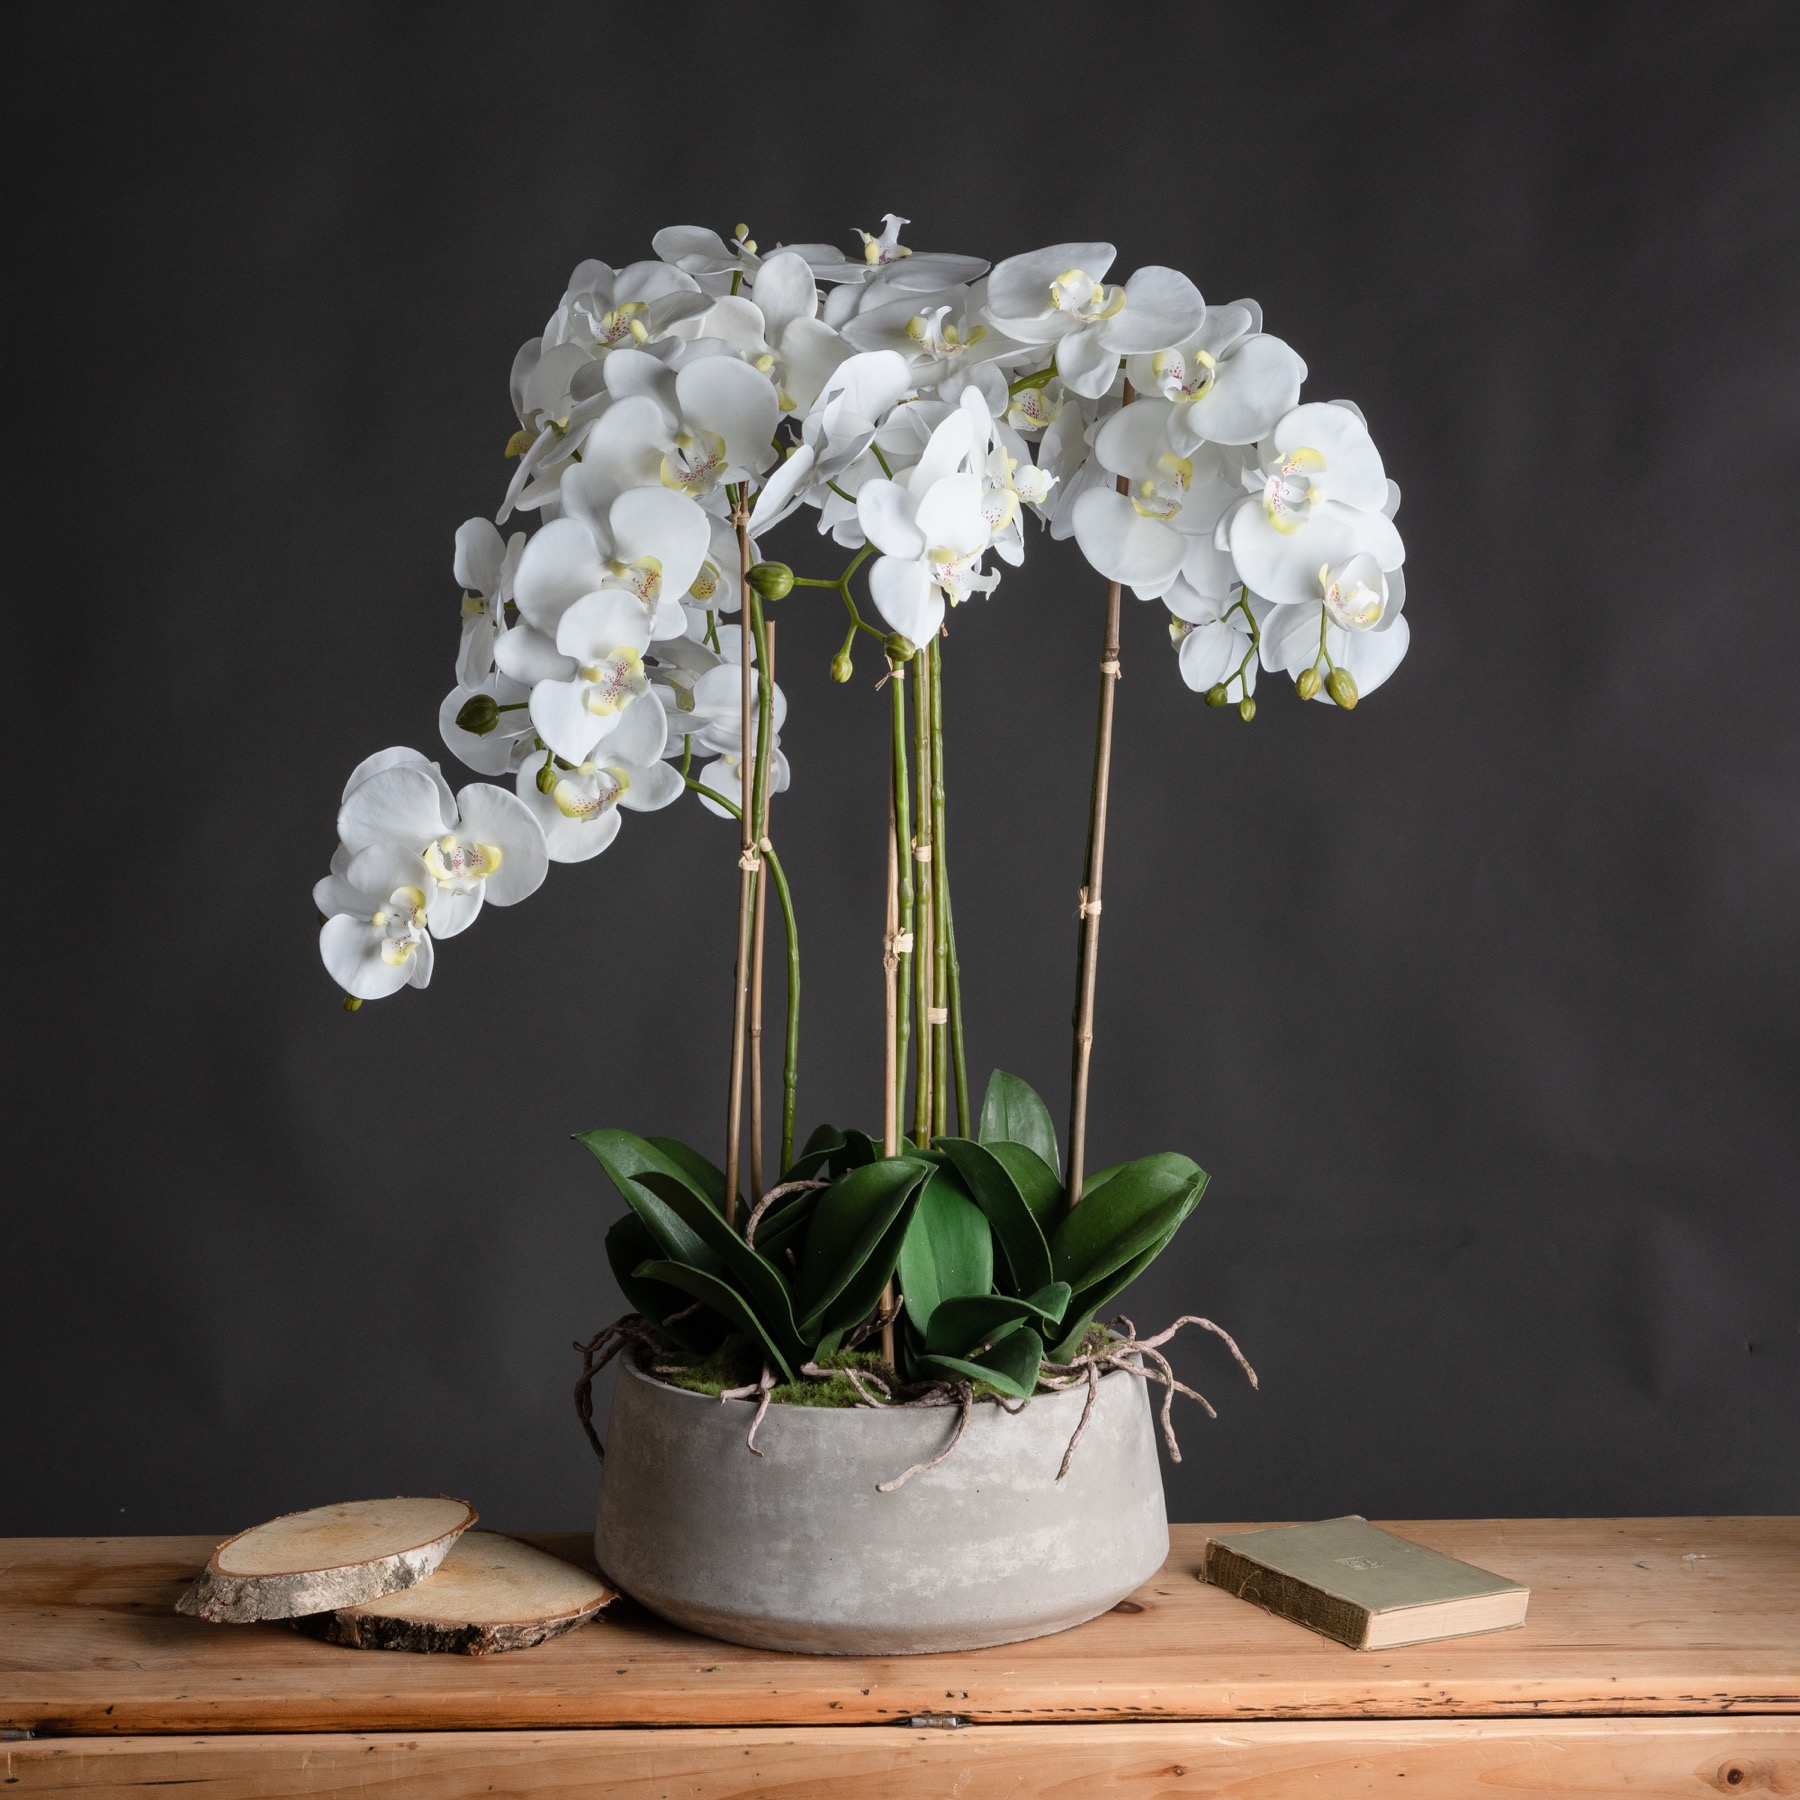 Large White Orchid In Stone Pot - Image 1